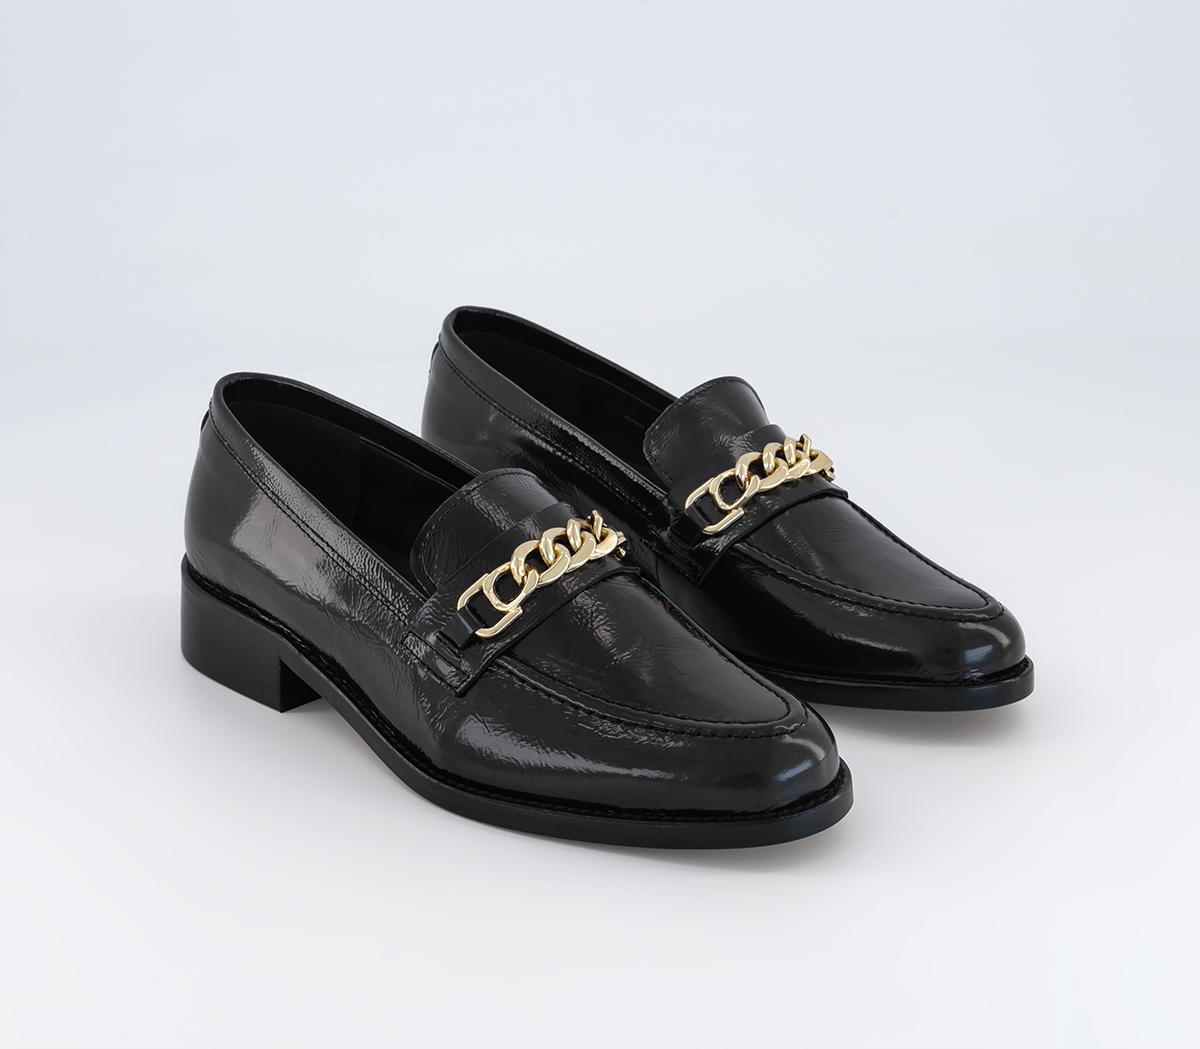 OFFICE Fargo Spain Chain Loafers Black Leather - Flat Shoes for Women